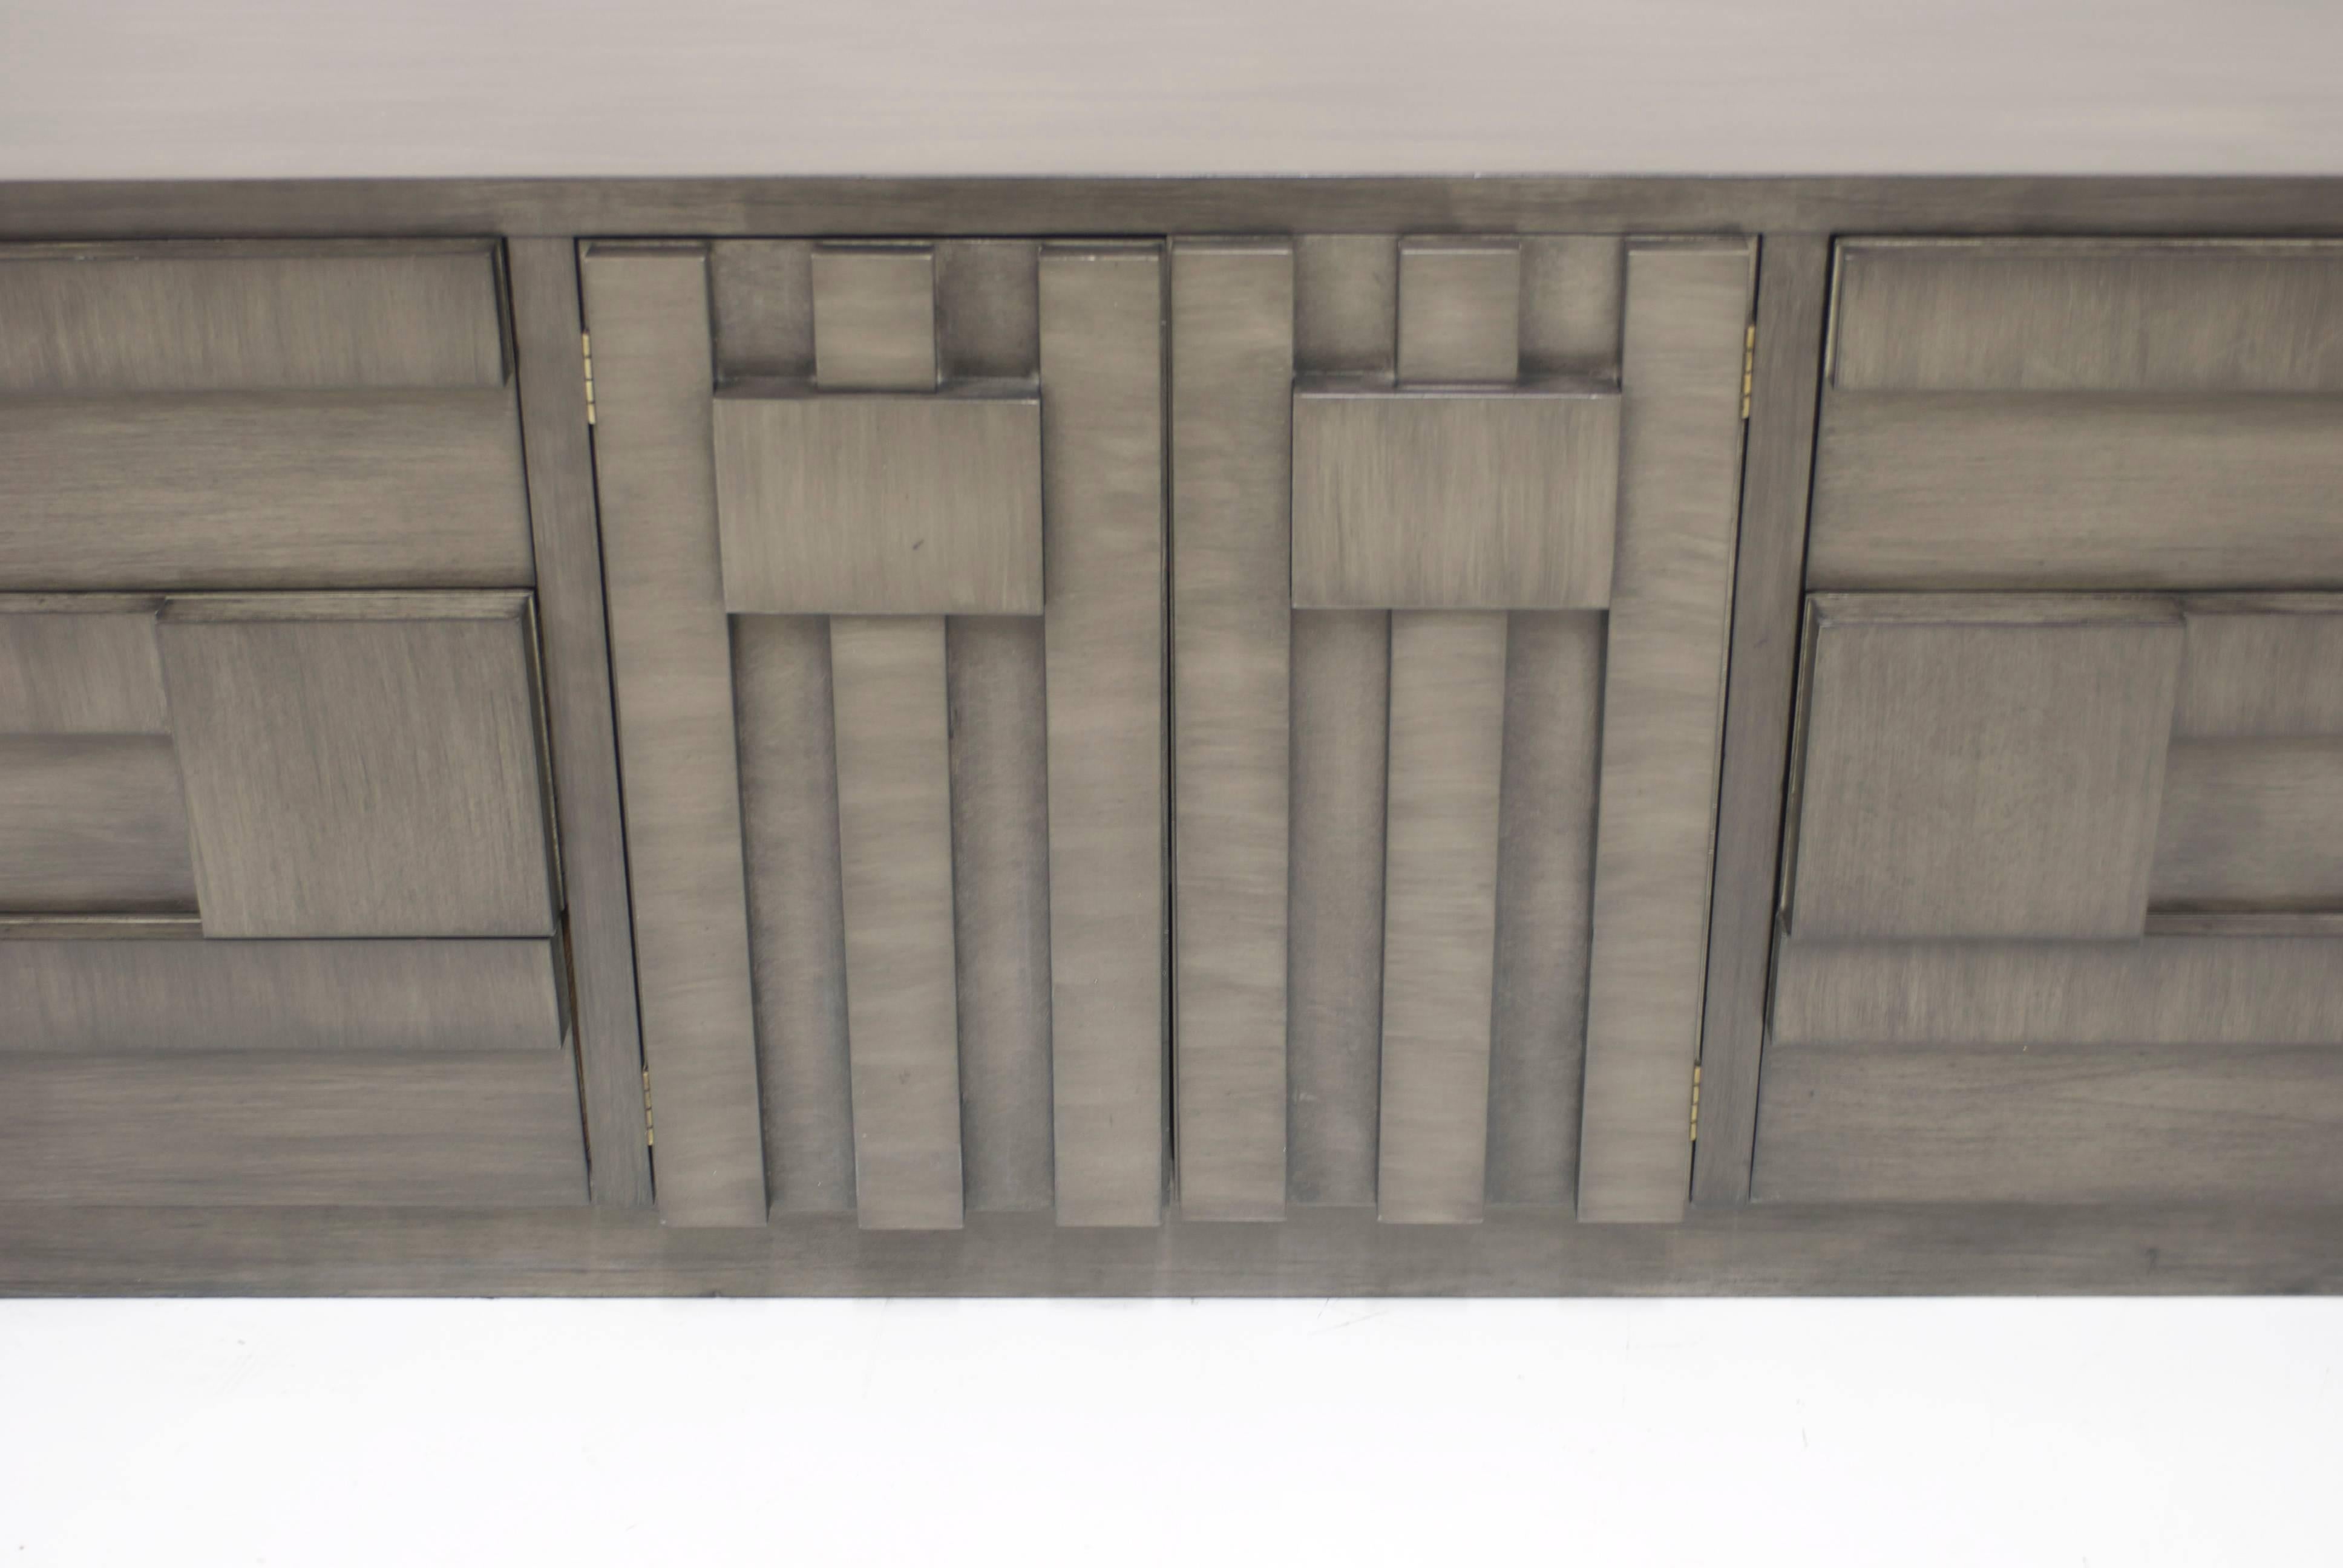 This dresser or sideboard manufactured by Lane has a handsome geometric pattern on the door and drawer fronts. It has been refinished in a multilayered charcoal grey finish which has a ashy grey undertone and then a brushed stain of charcoal layered